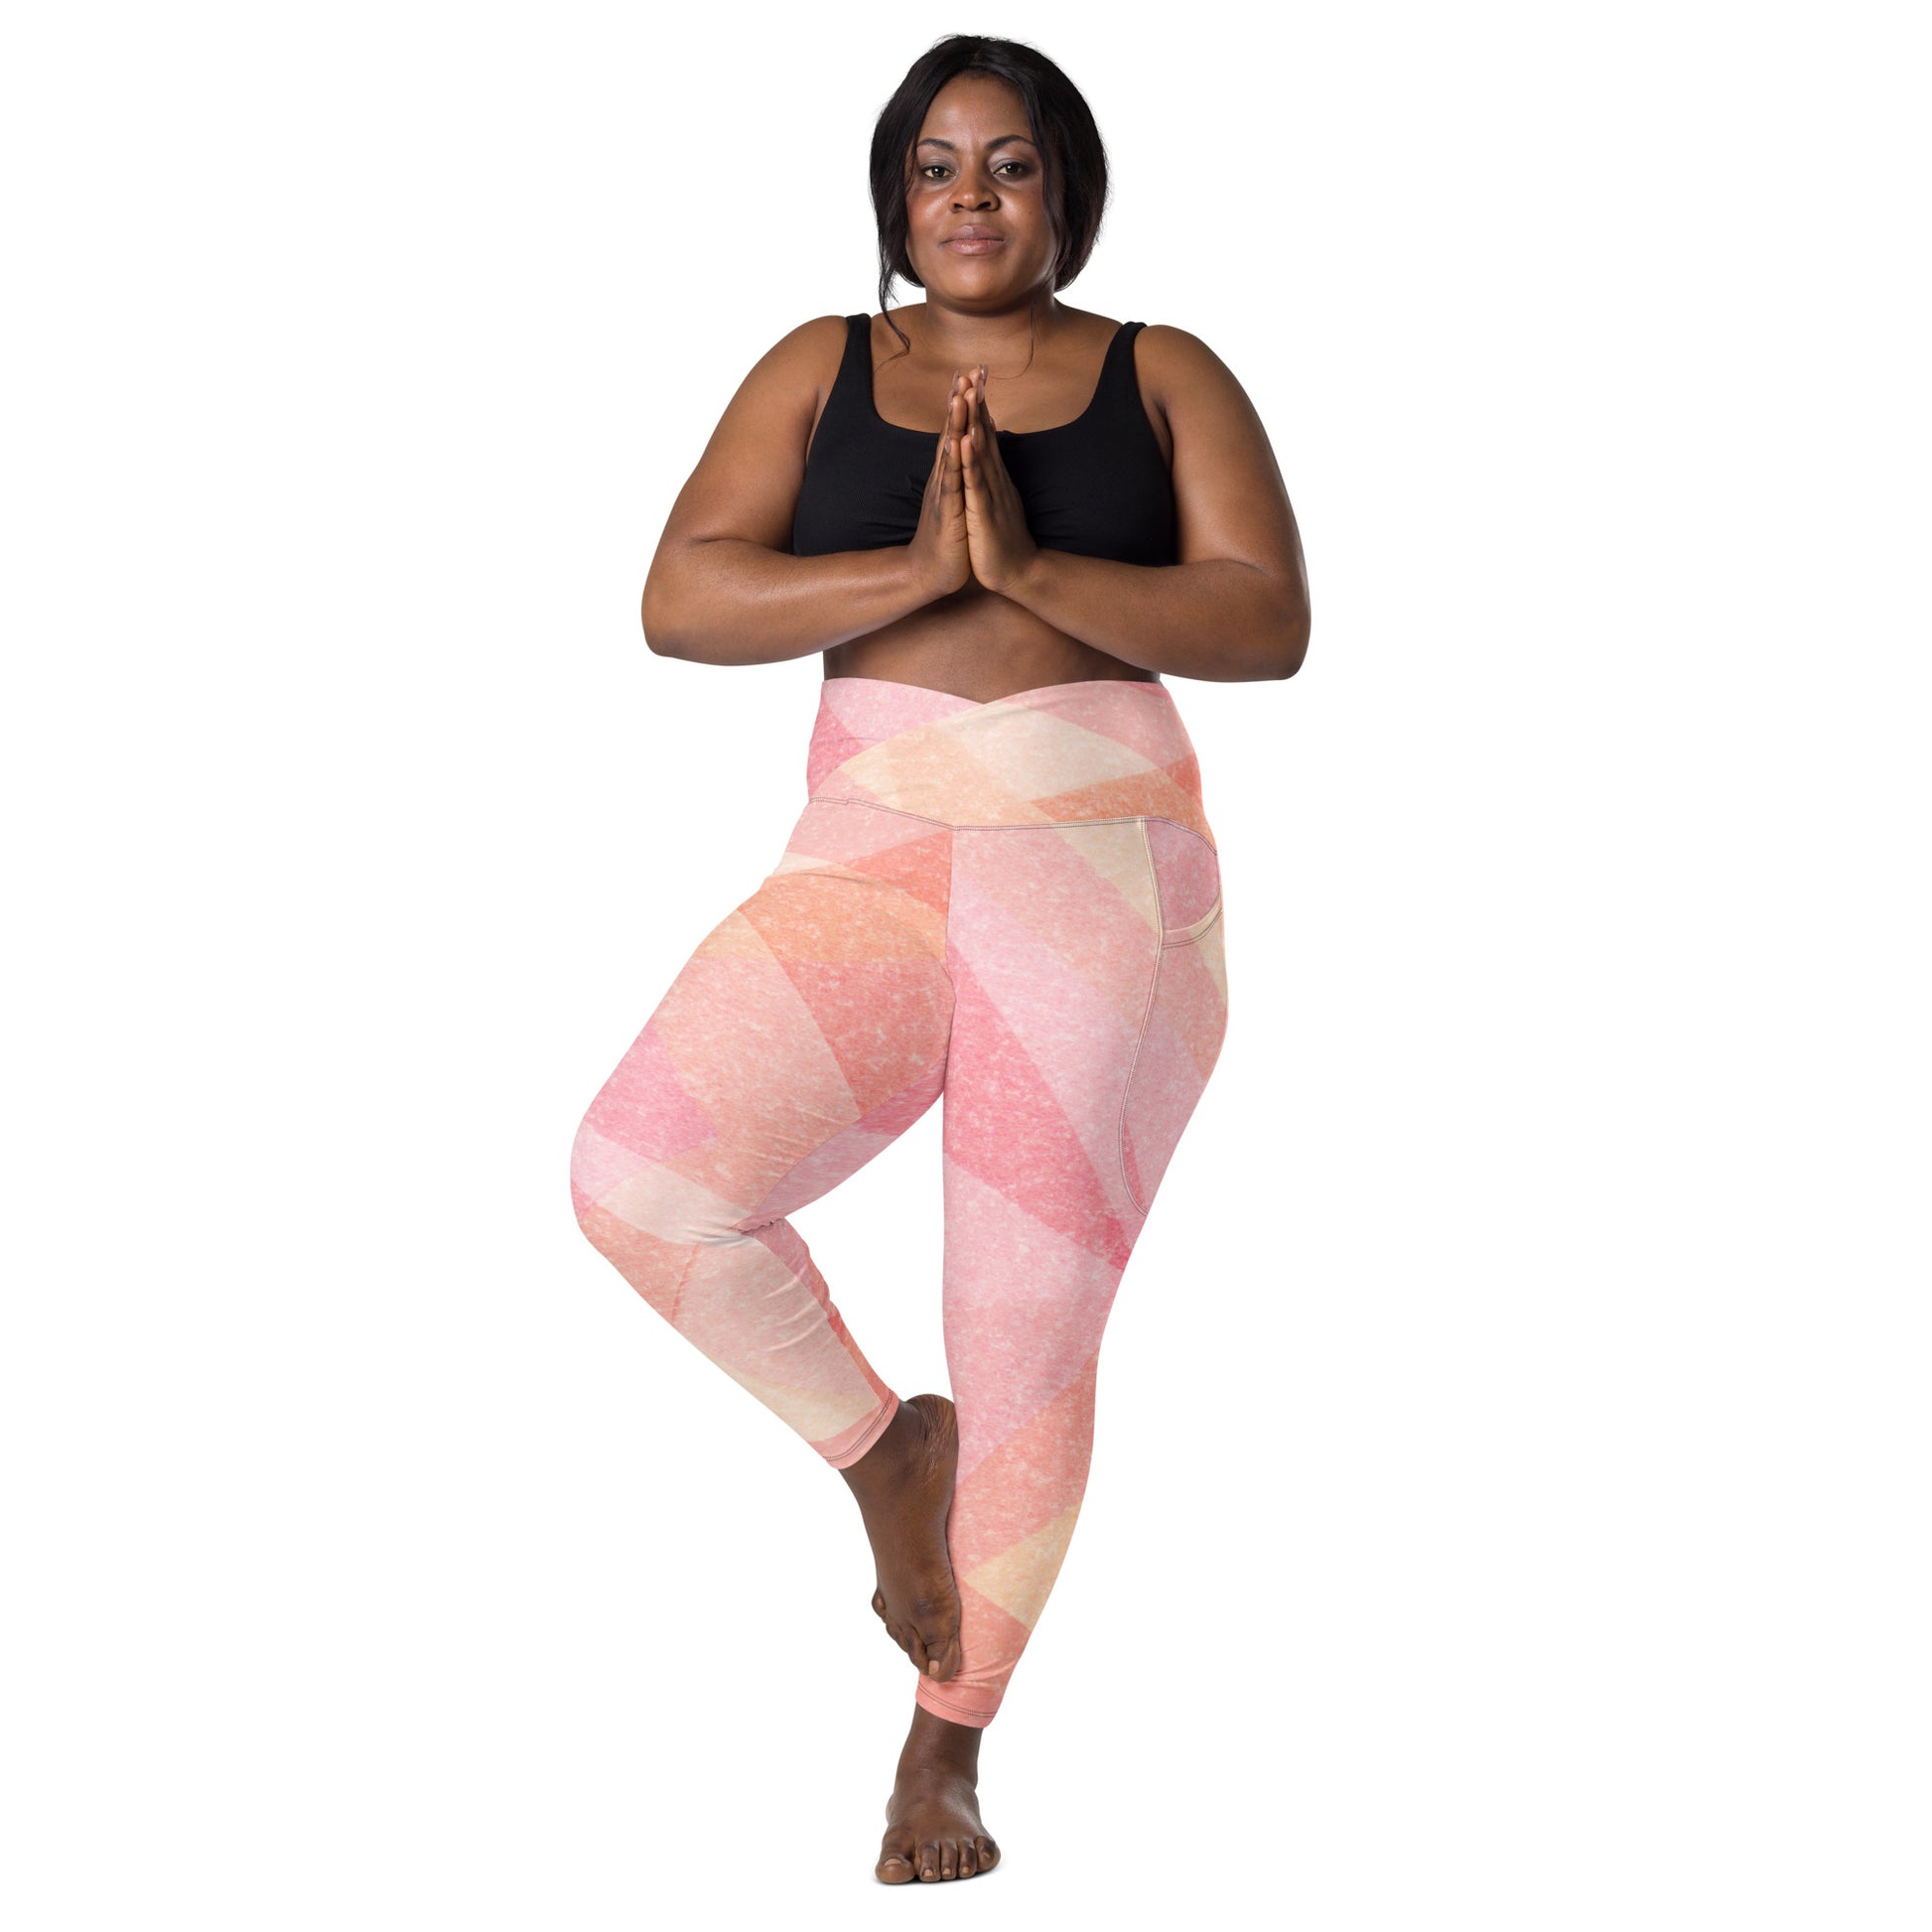 ActiveFuse Leggings by Jain  Stylish and Supportive Workout